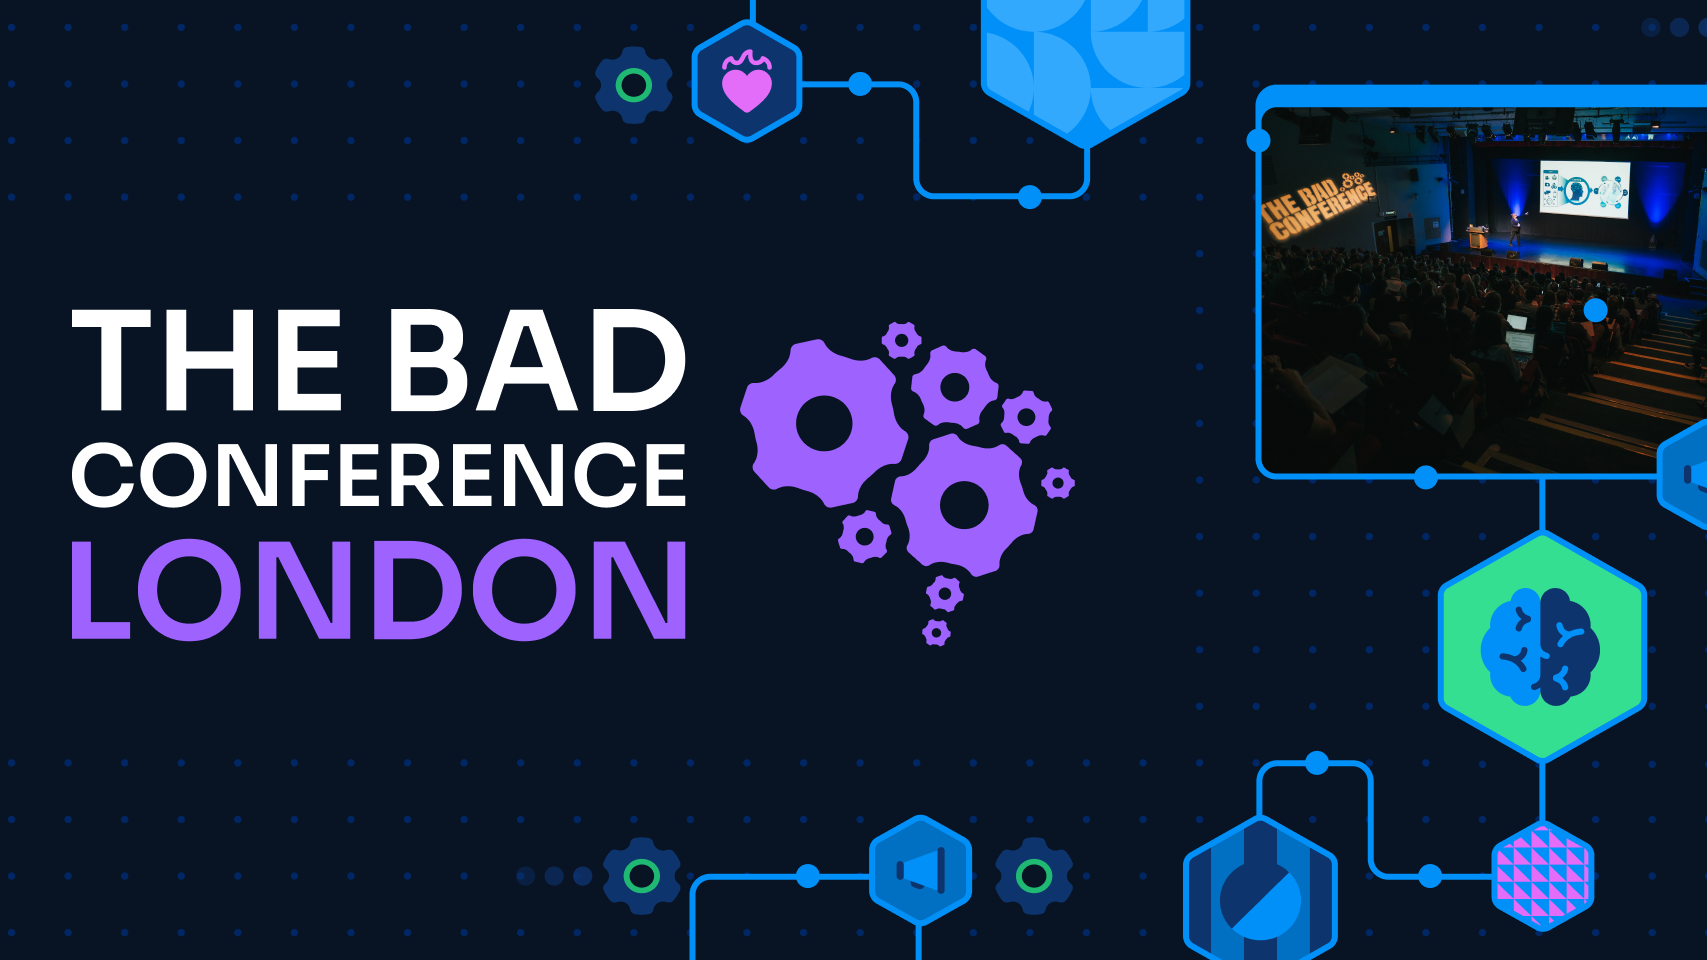 The BAD Conference London